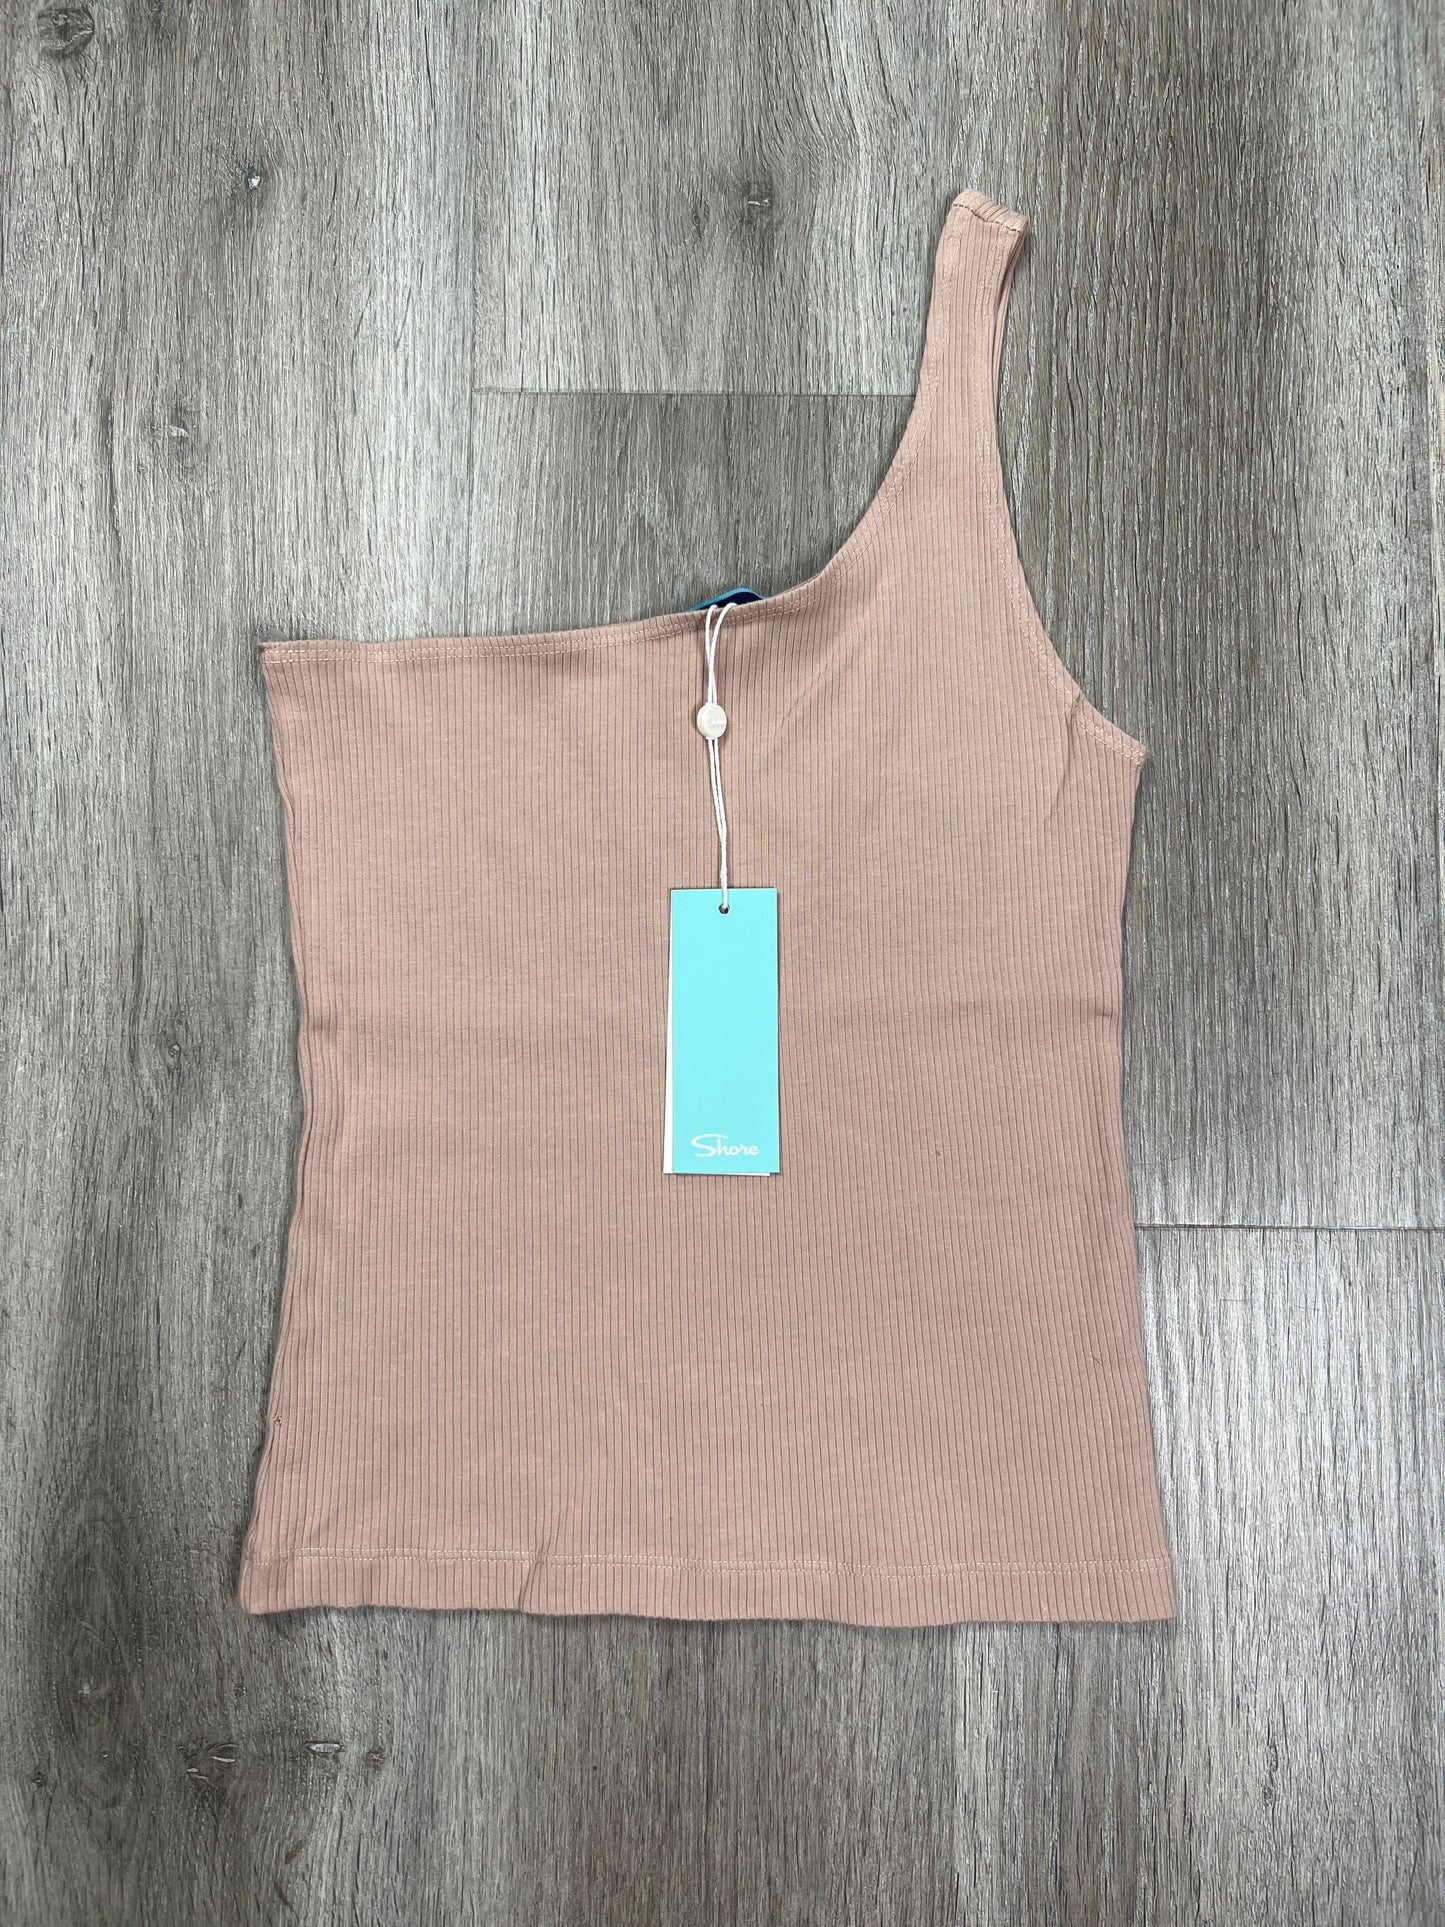 Brown Top Sleeveless Shore, Size L